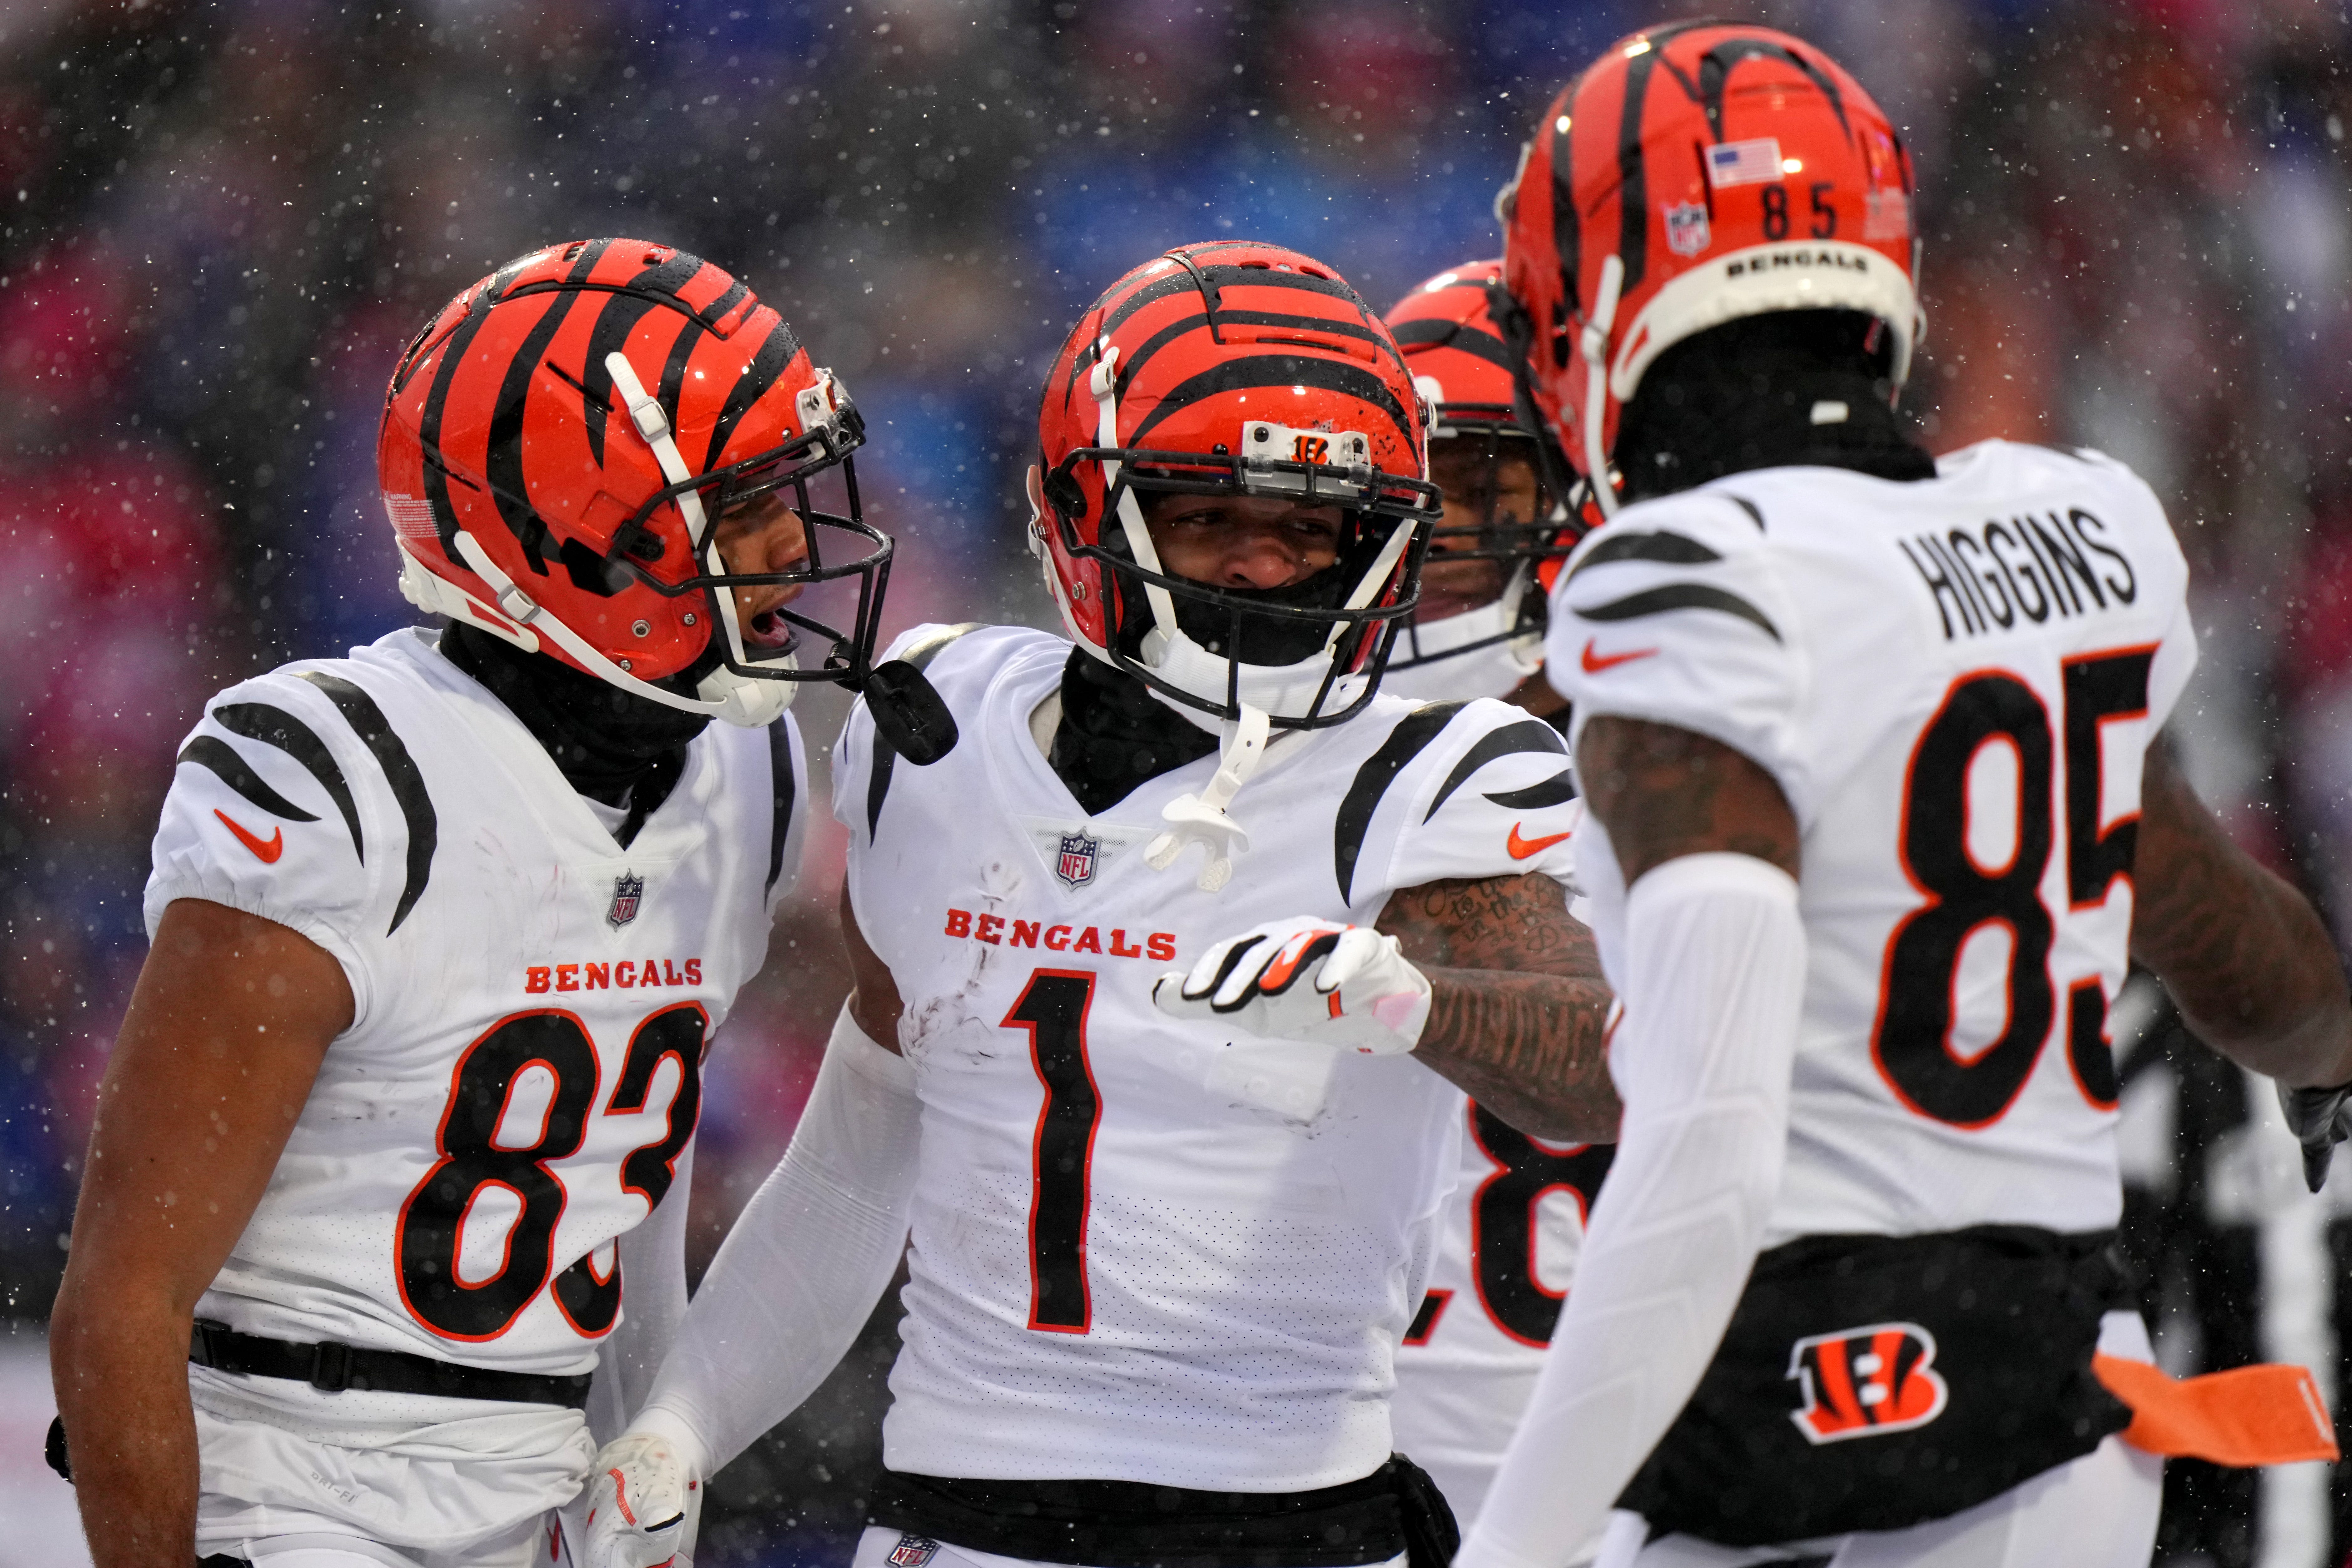 'I don't think we got respect': Bengals enter AFC title game with chip on their shoulder | Opinion